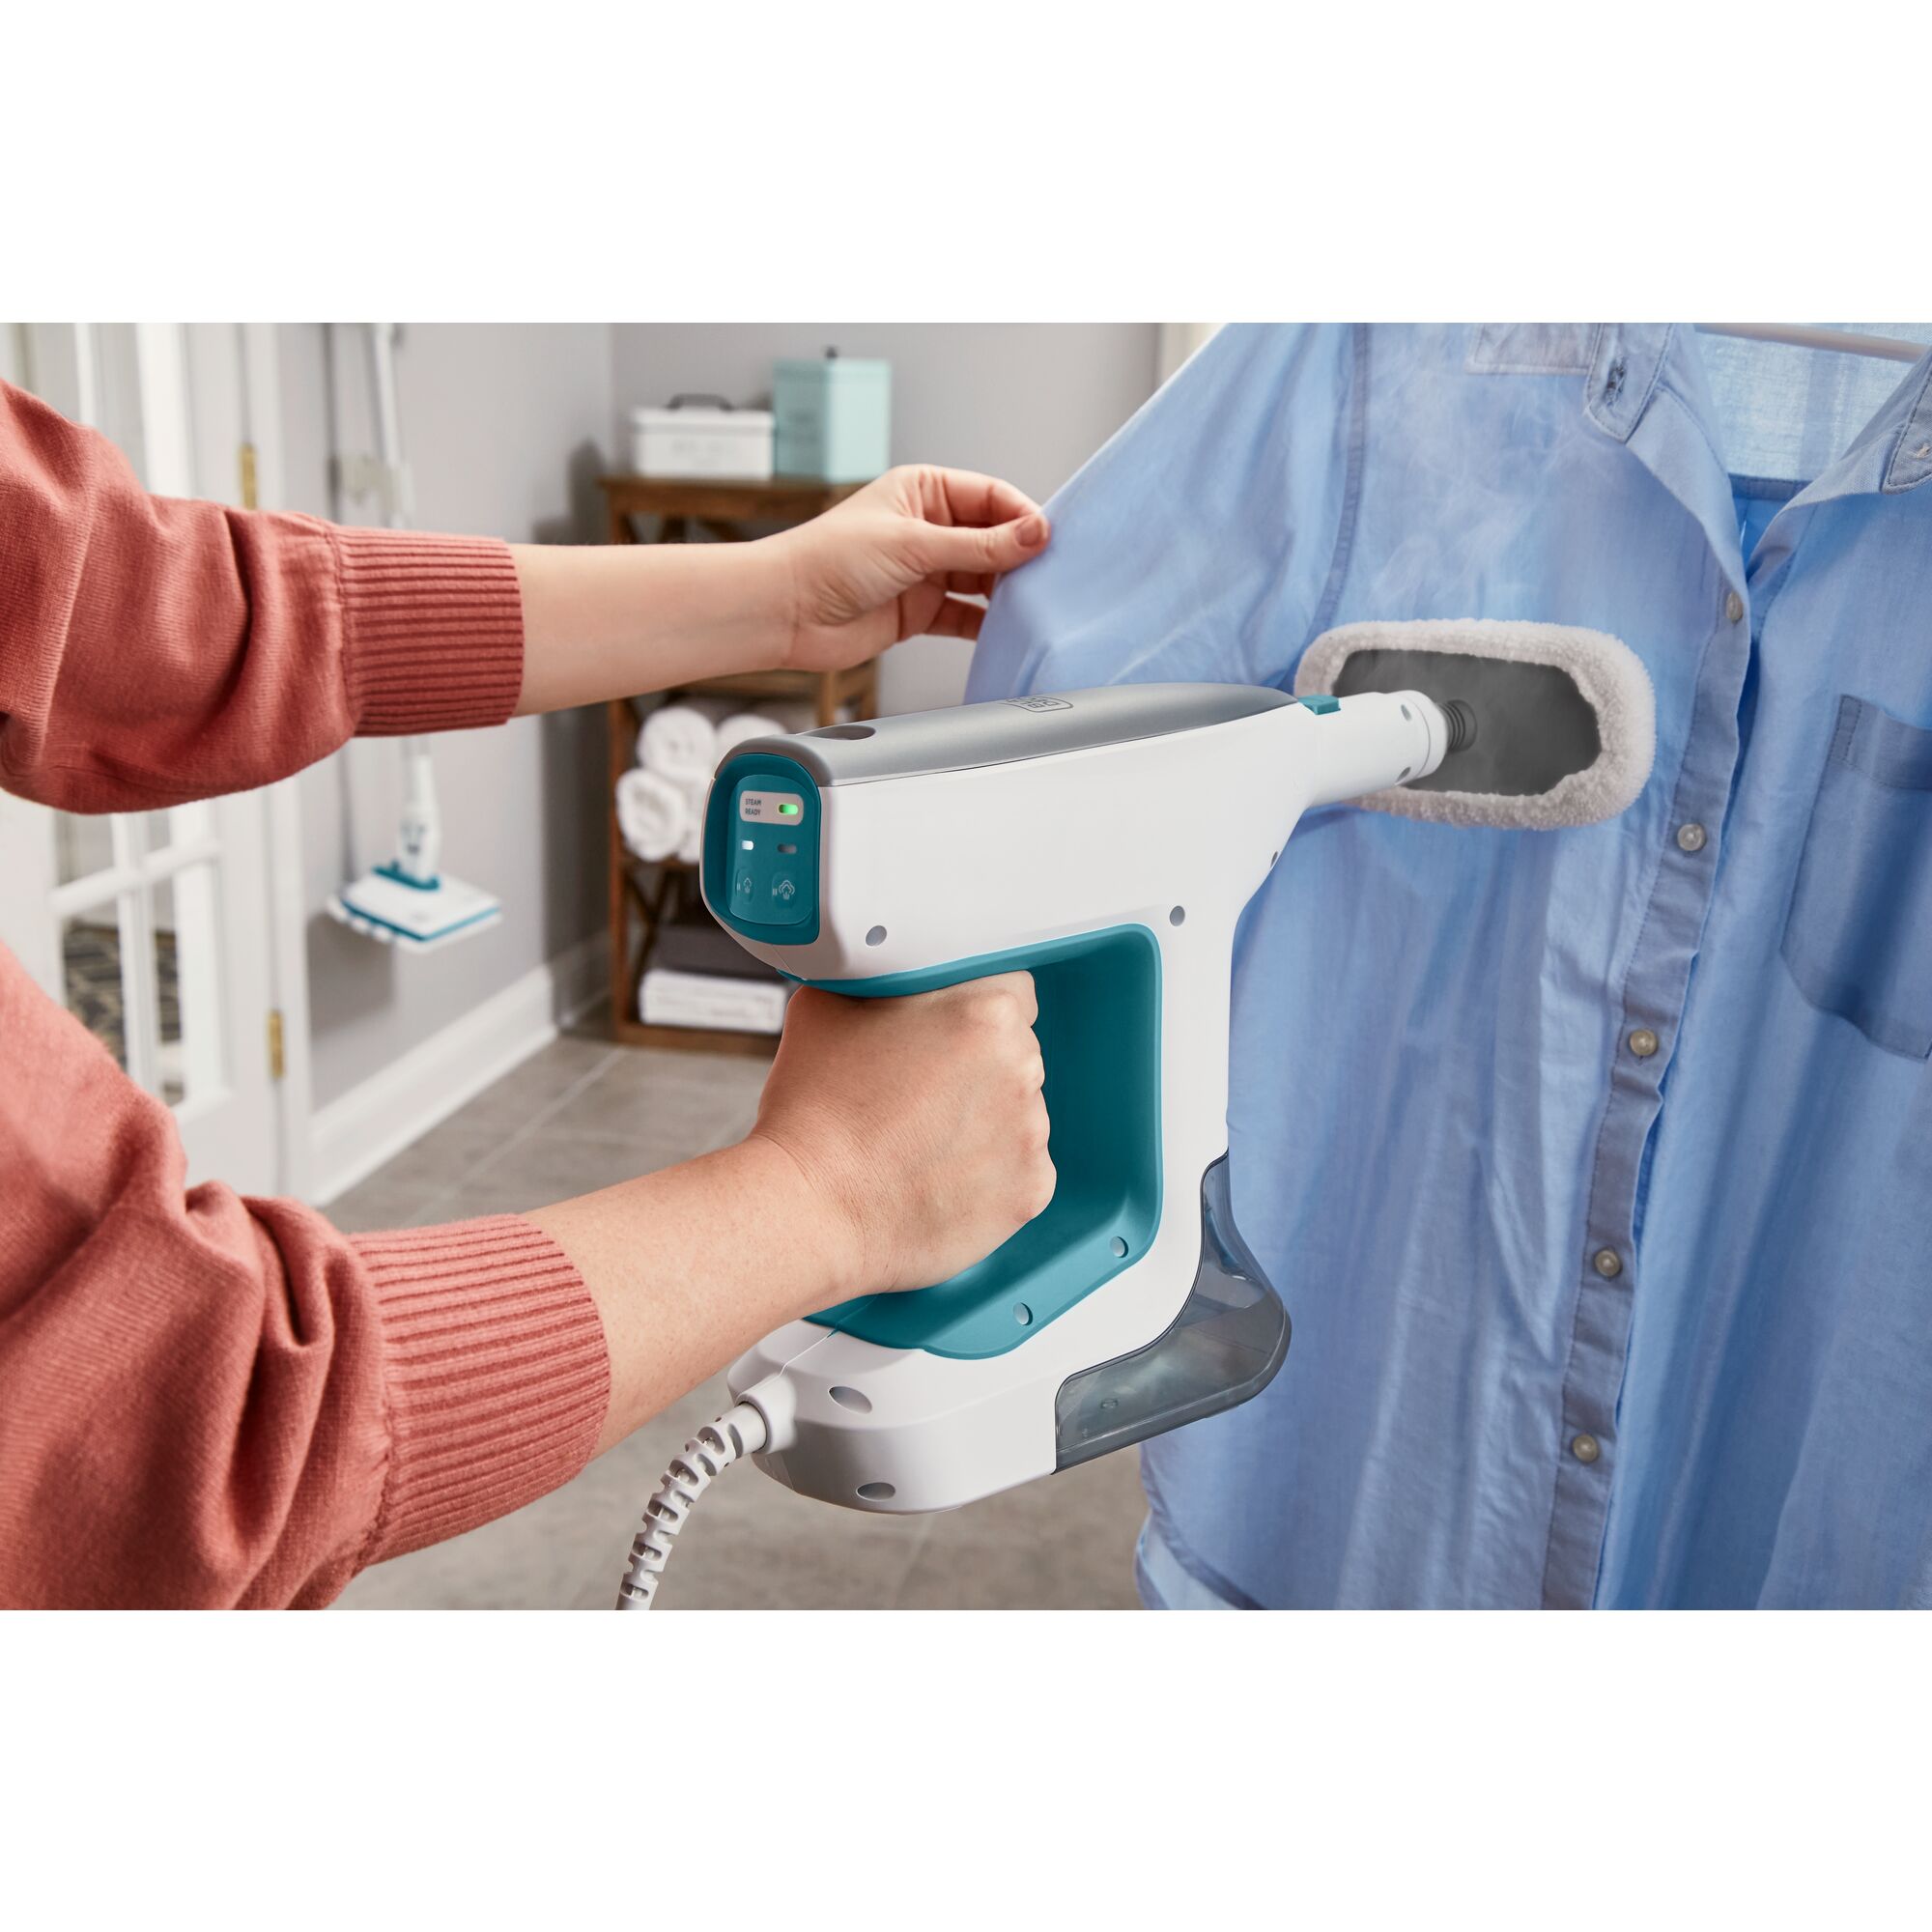 Person steaming a shirt with the BHSM15FX10 garment steamer attachment